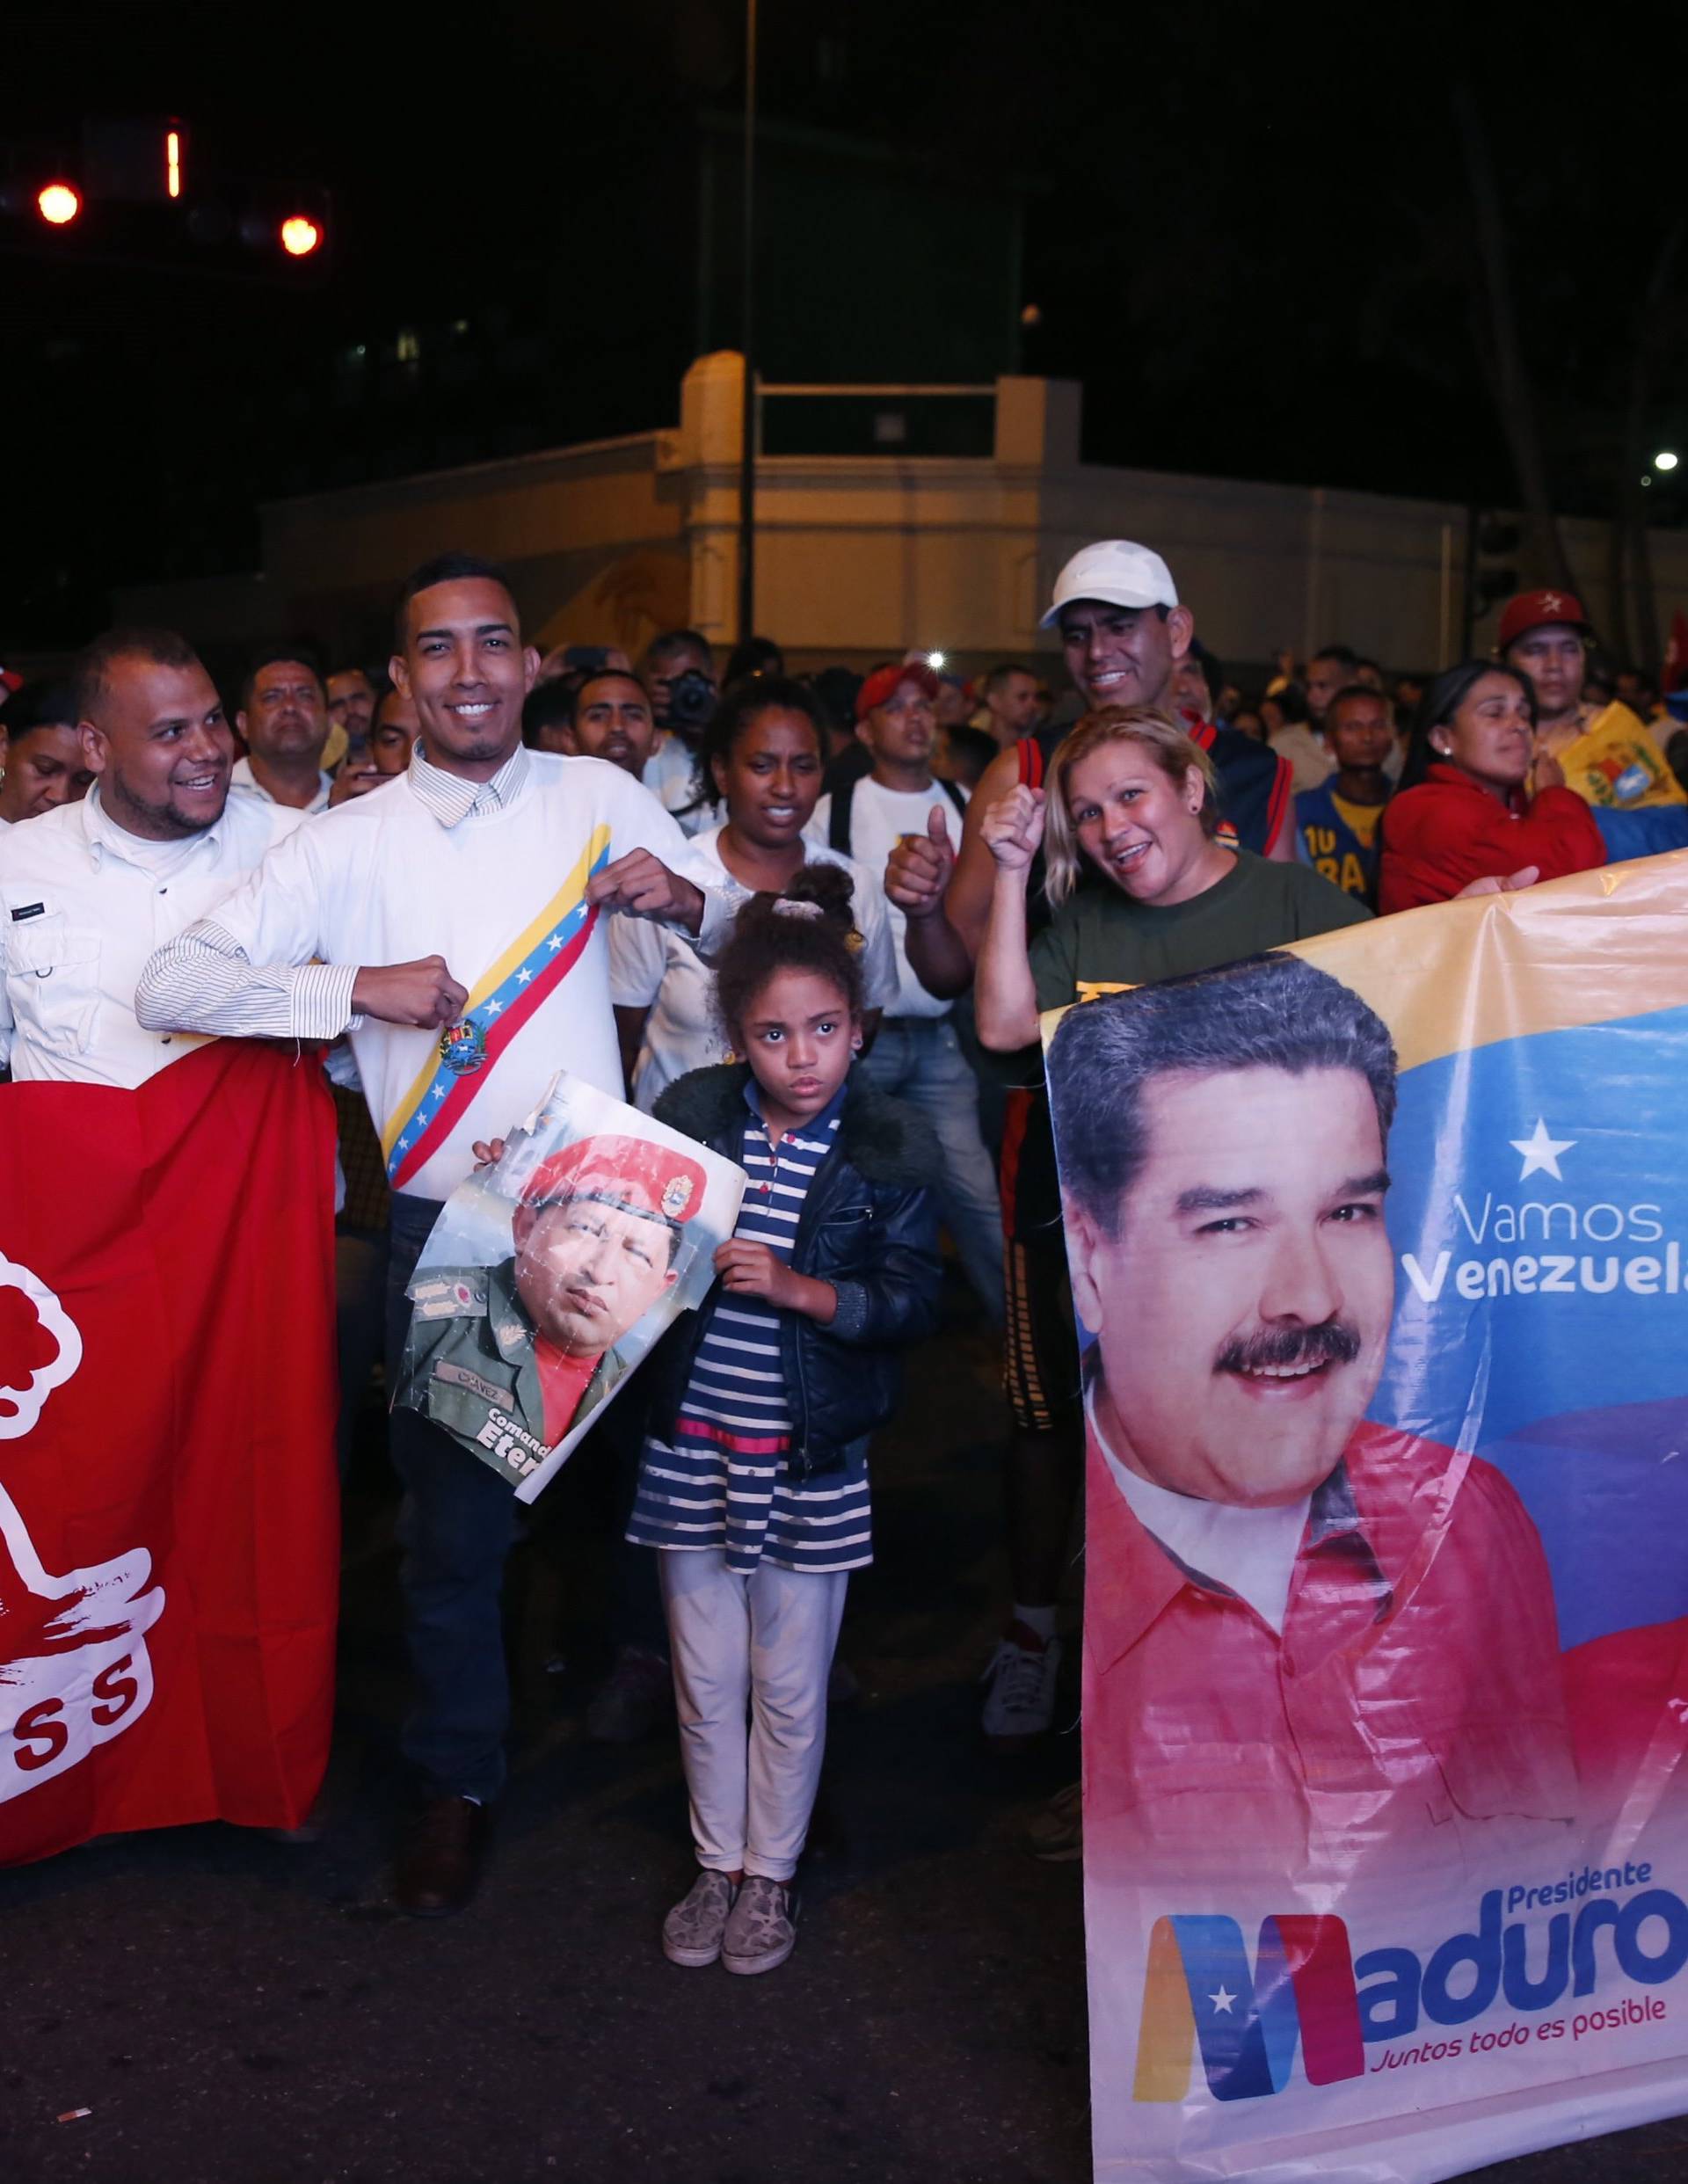 Supporters of Venezuela's President Nicolas Maduro celebrate the results of the election in Caracas